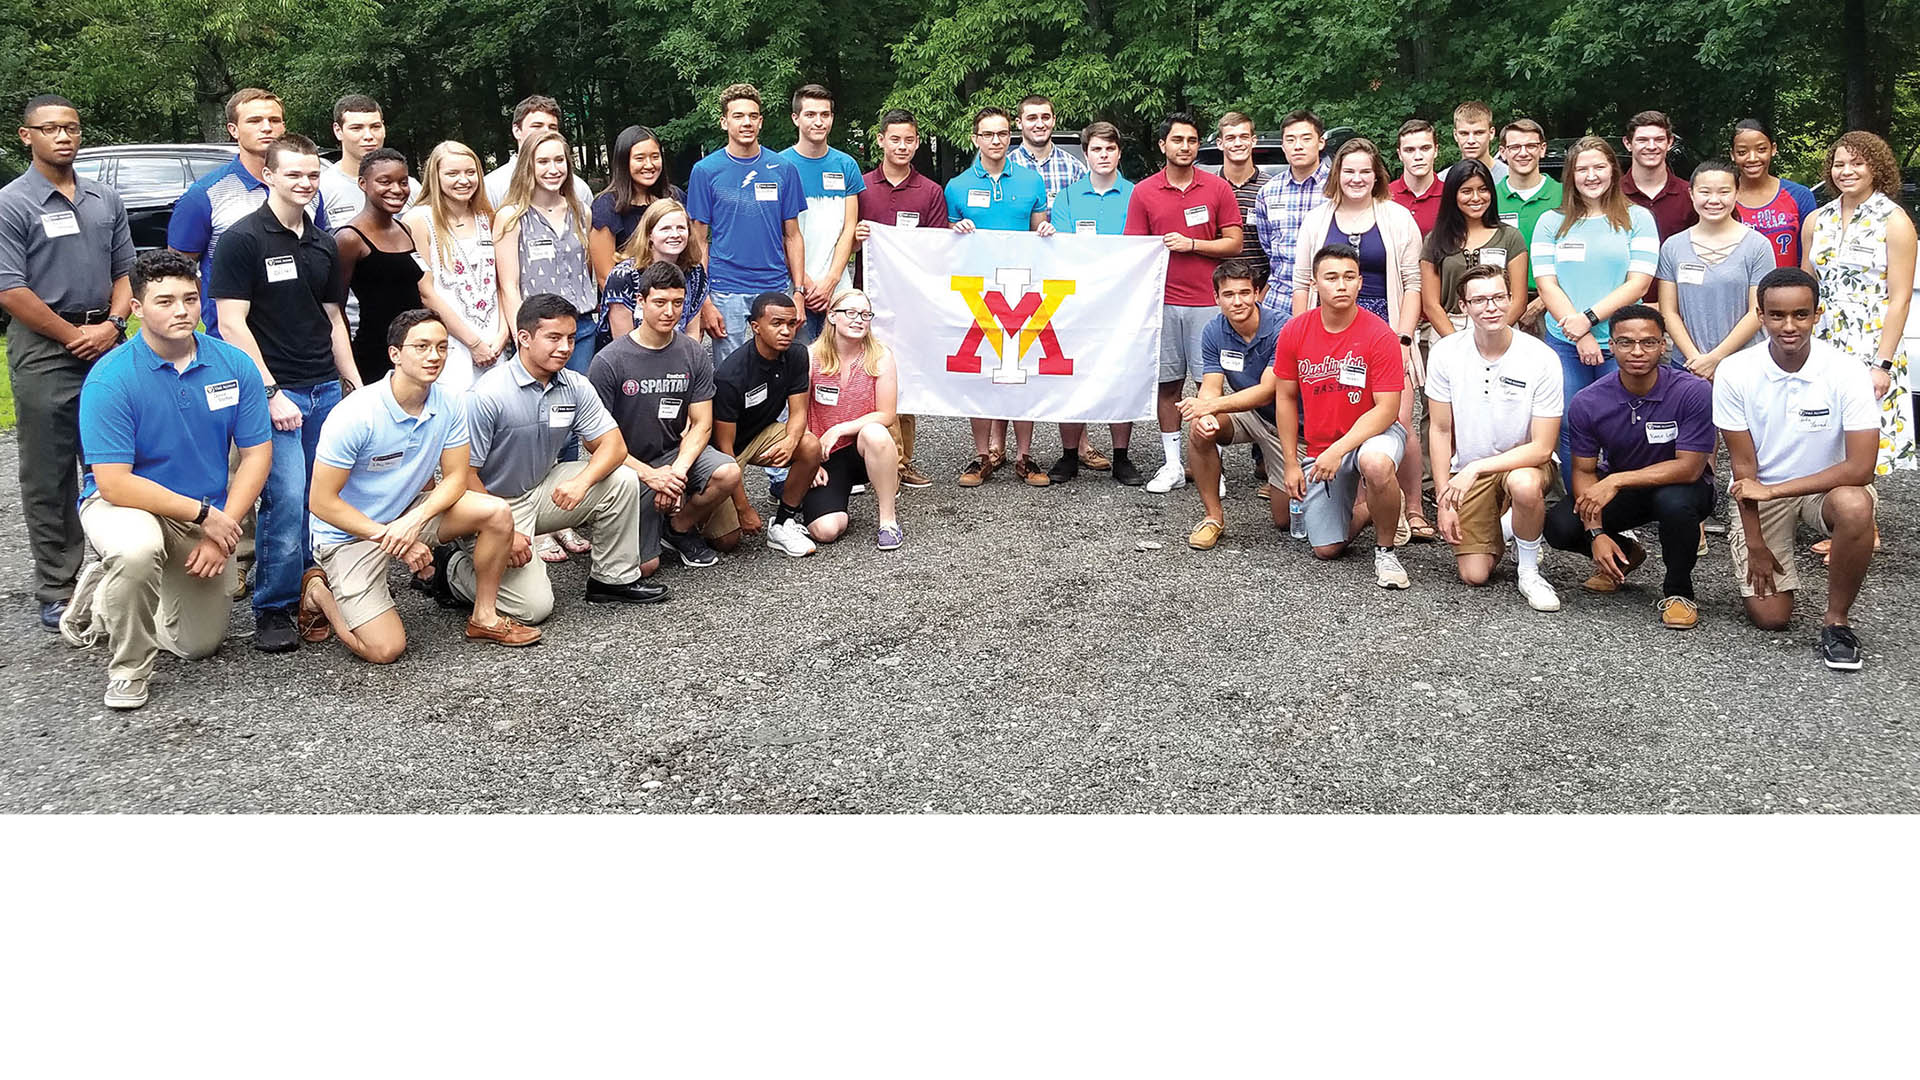 Group of men and women holding up a VMI flag and smiling.